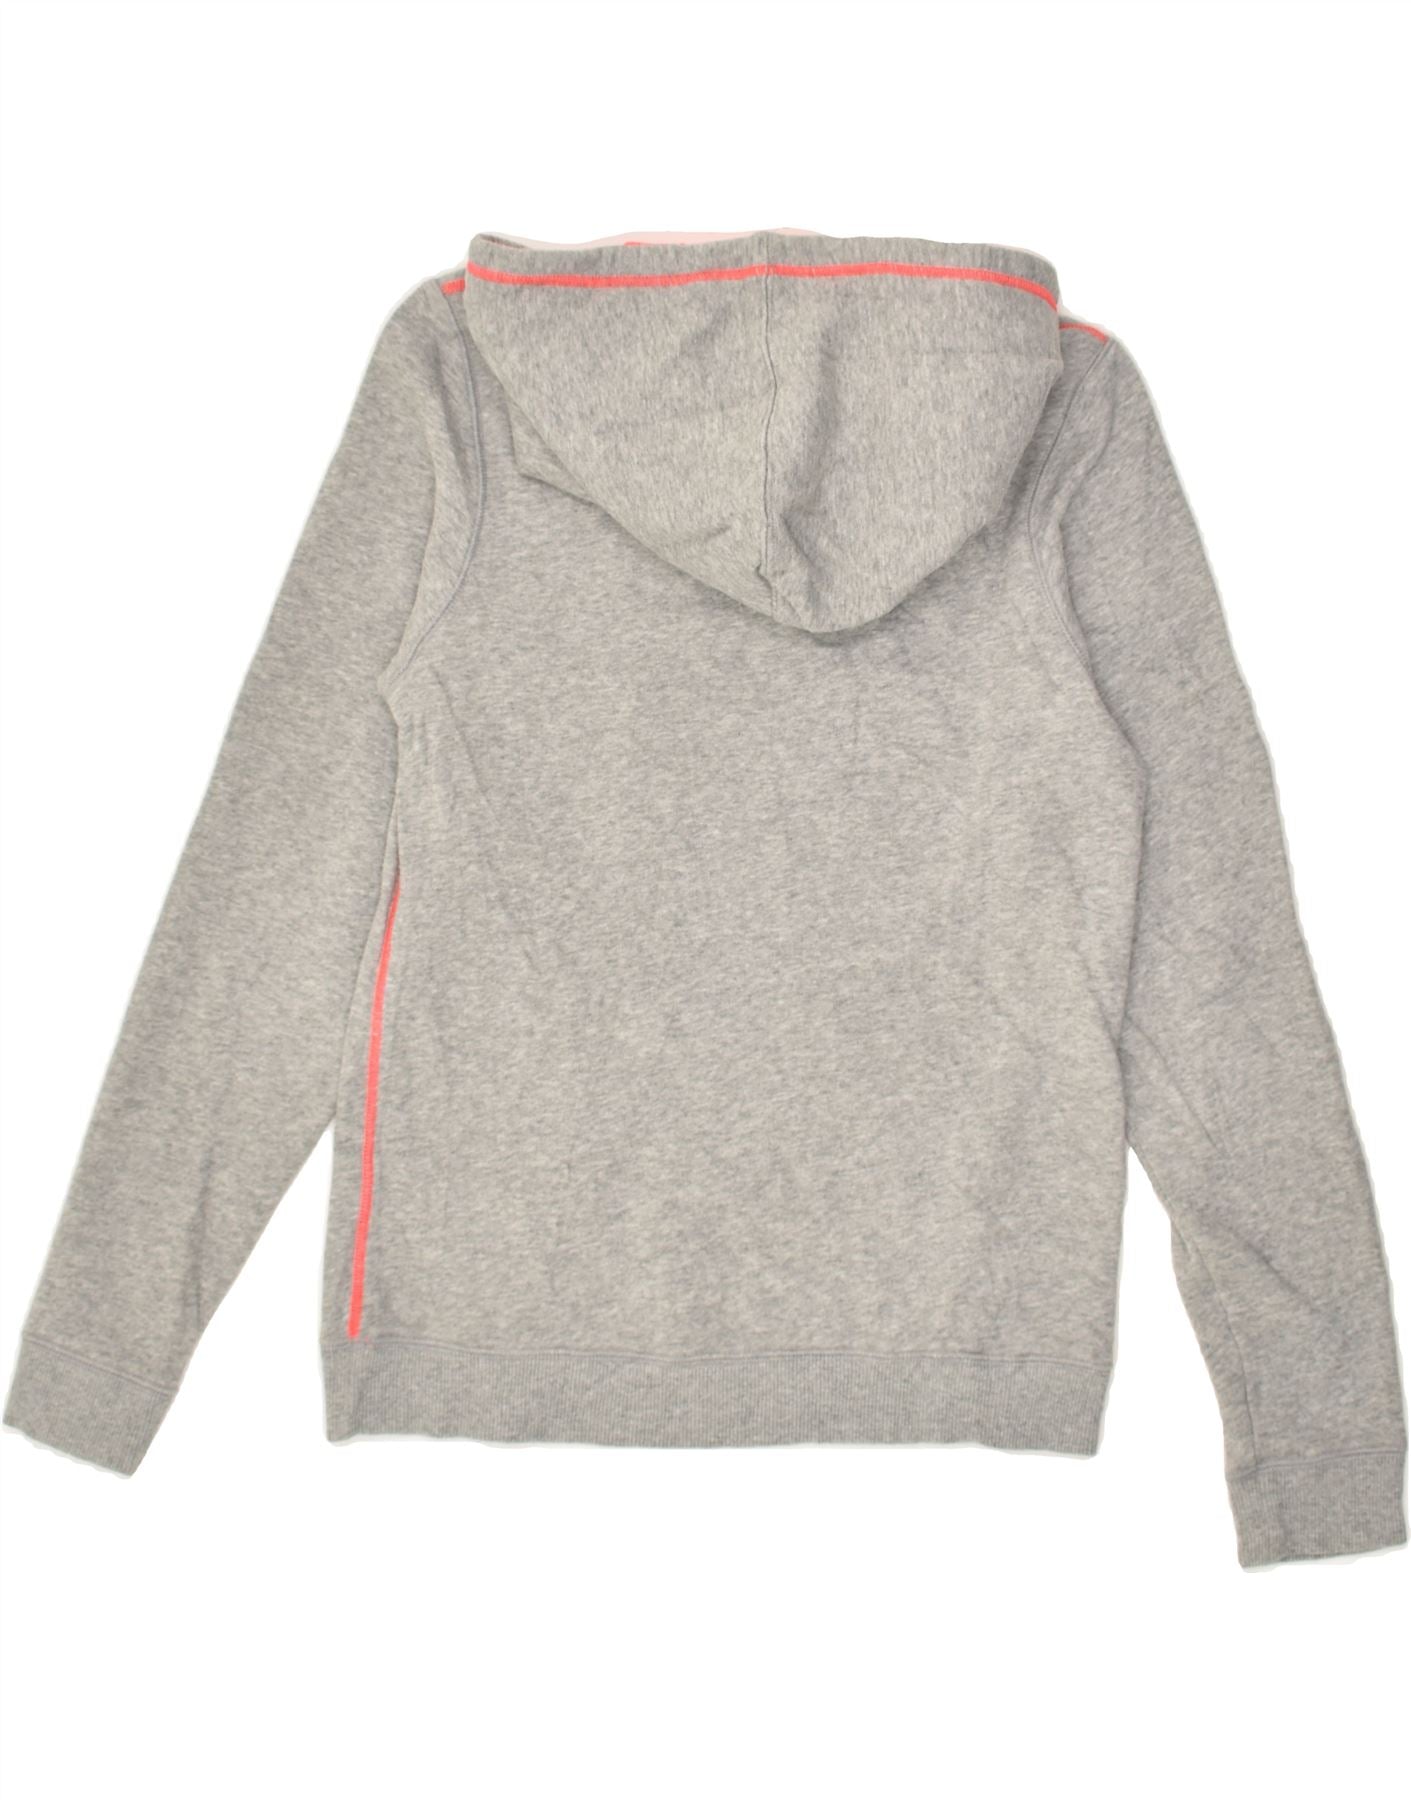 UNDER ARMOUR Womens Hoodie Jumper UK 10 Small Grey Cotton, Vintage &  Second-Hand Clothing Online